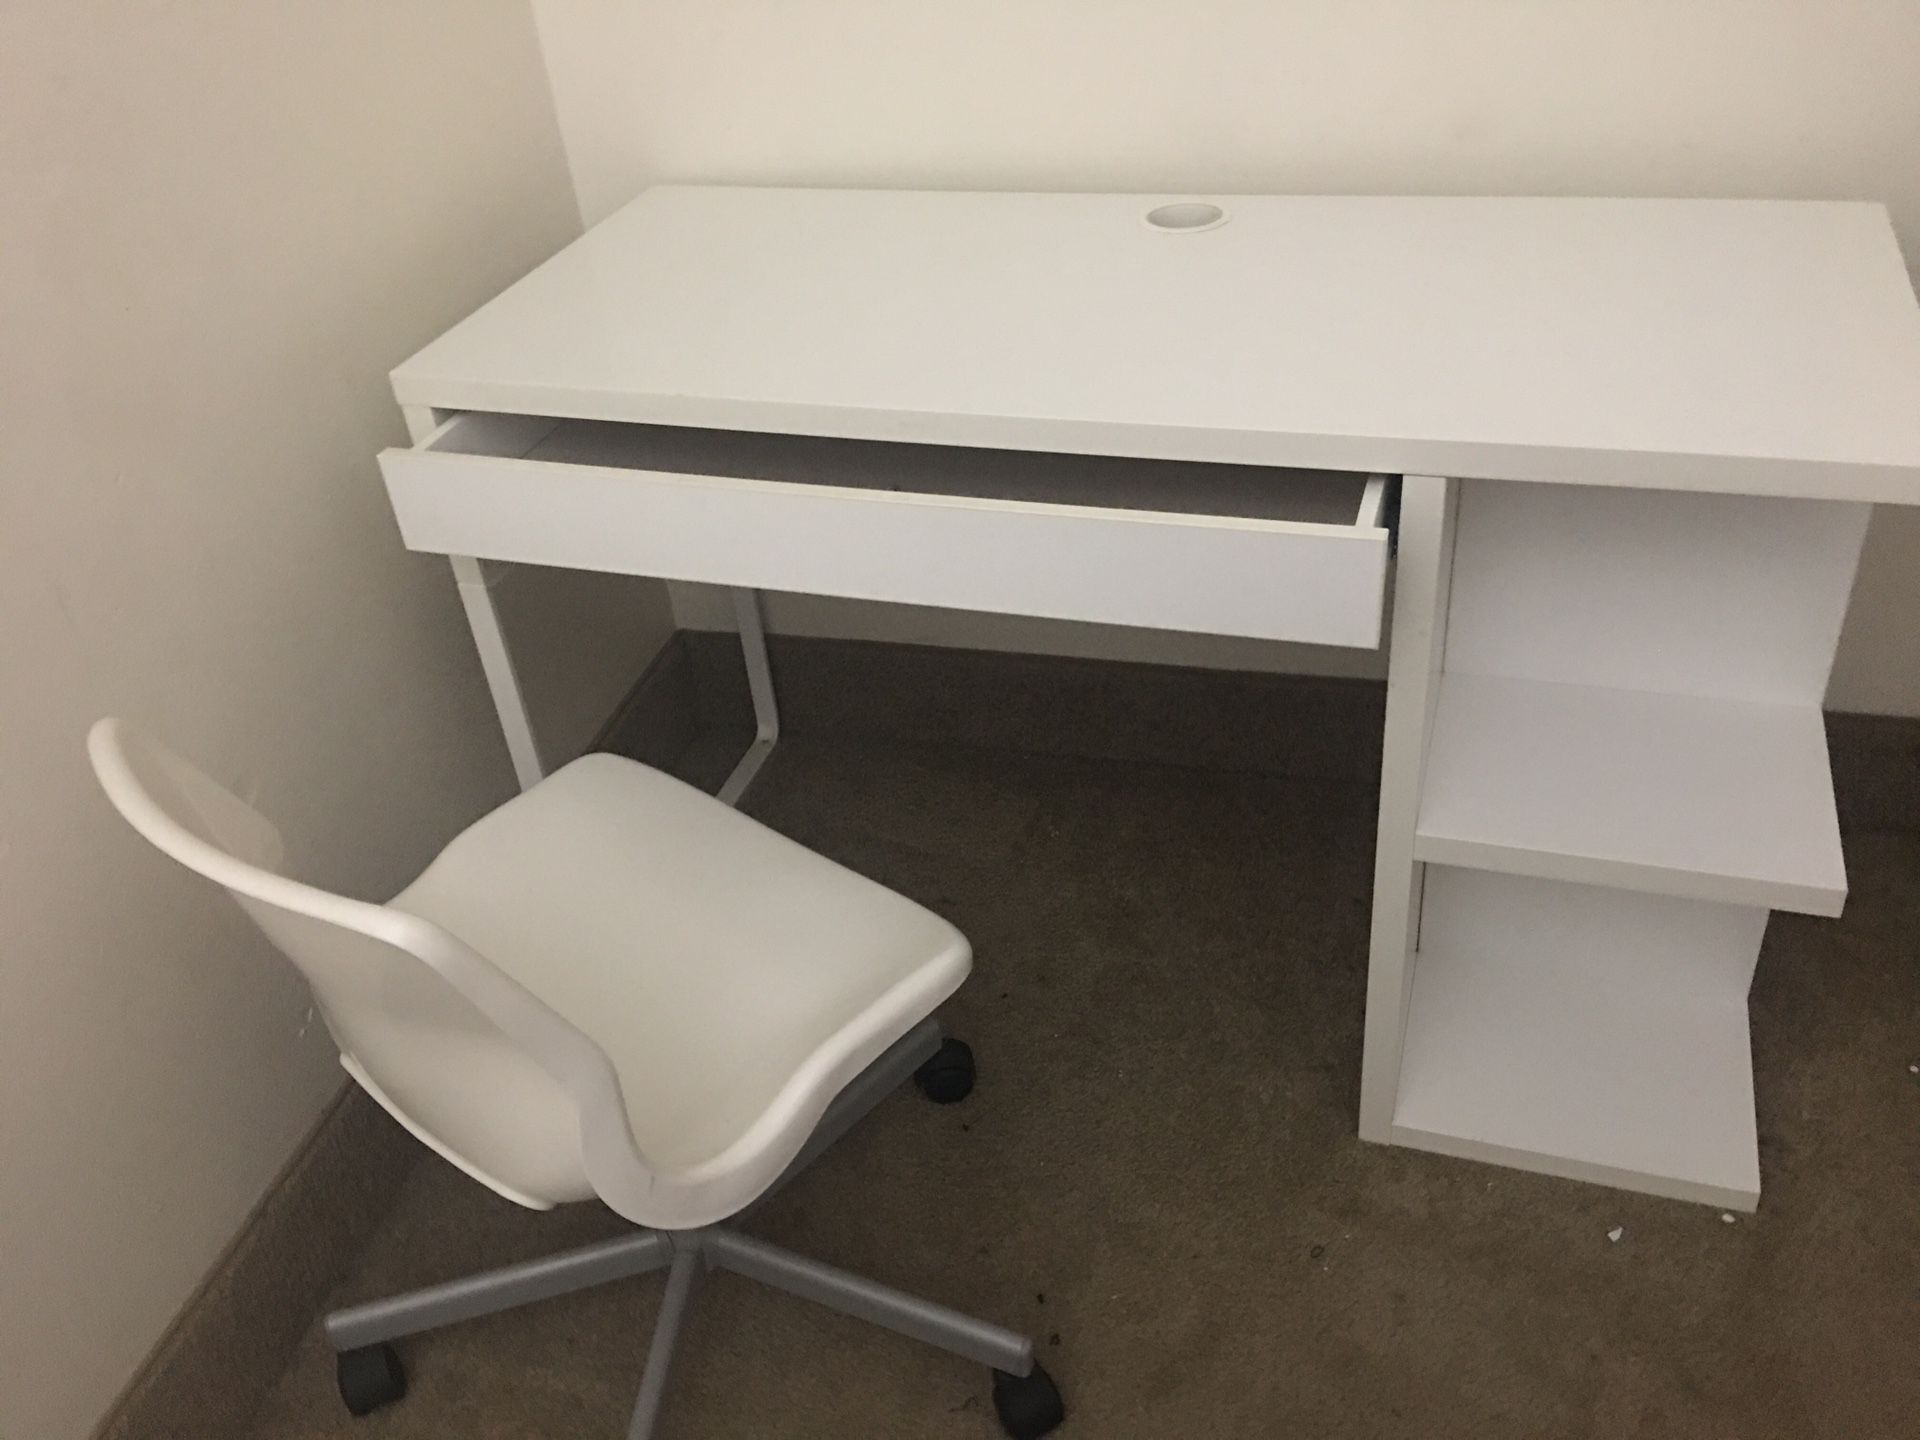 IKEA Desk and Resin Swivel Chair - excellent like new condition